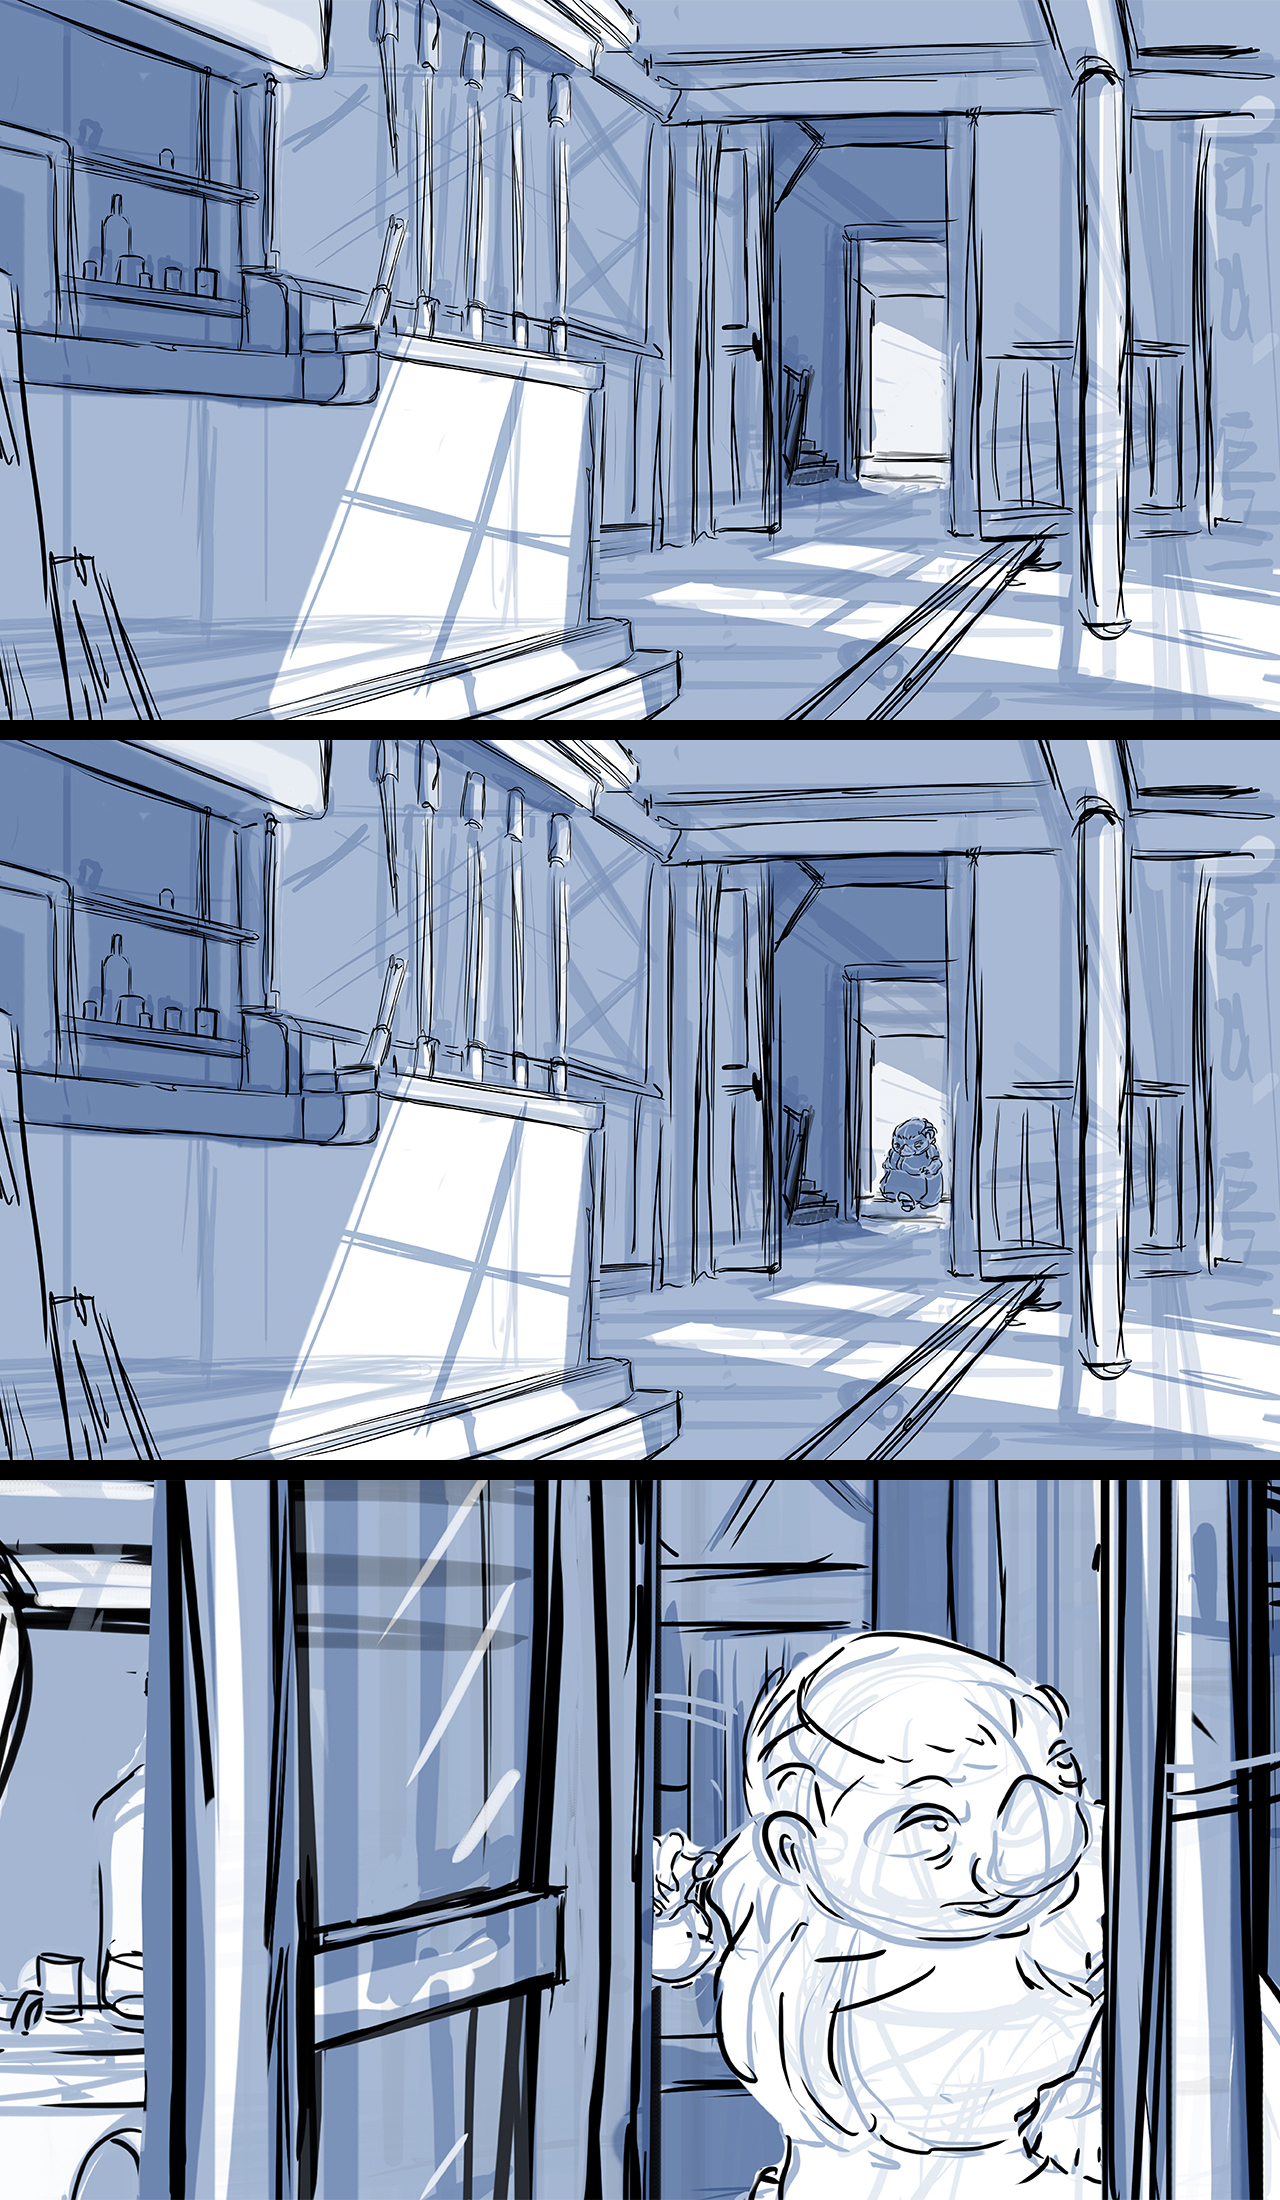 Storyboard sequence from an animated film. Sequence shows wide shot of a bar as the woman walks in. Last panel cuts to a mid shot of the woman walking past a pair of french doors.